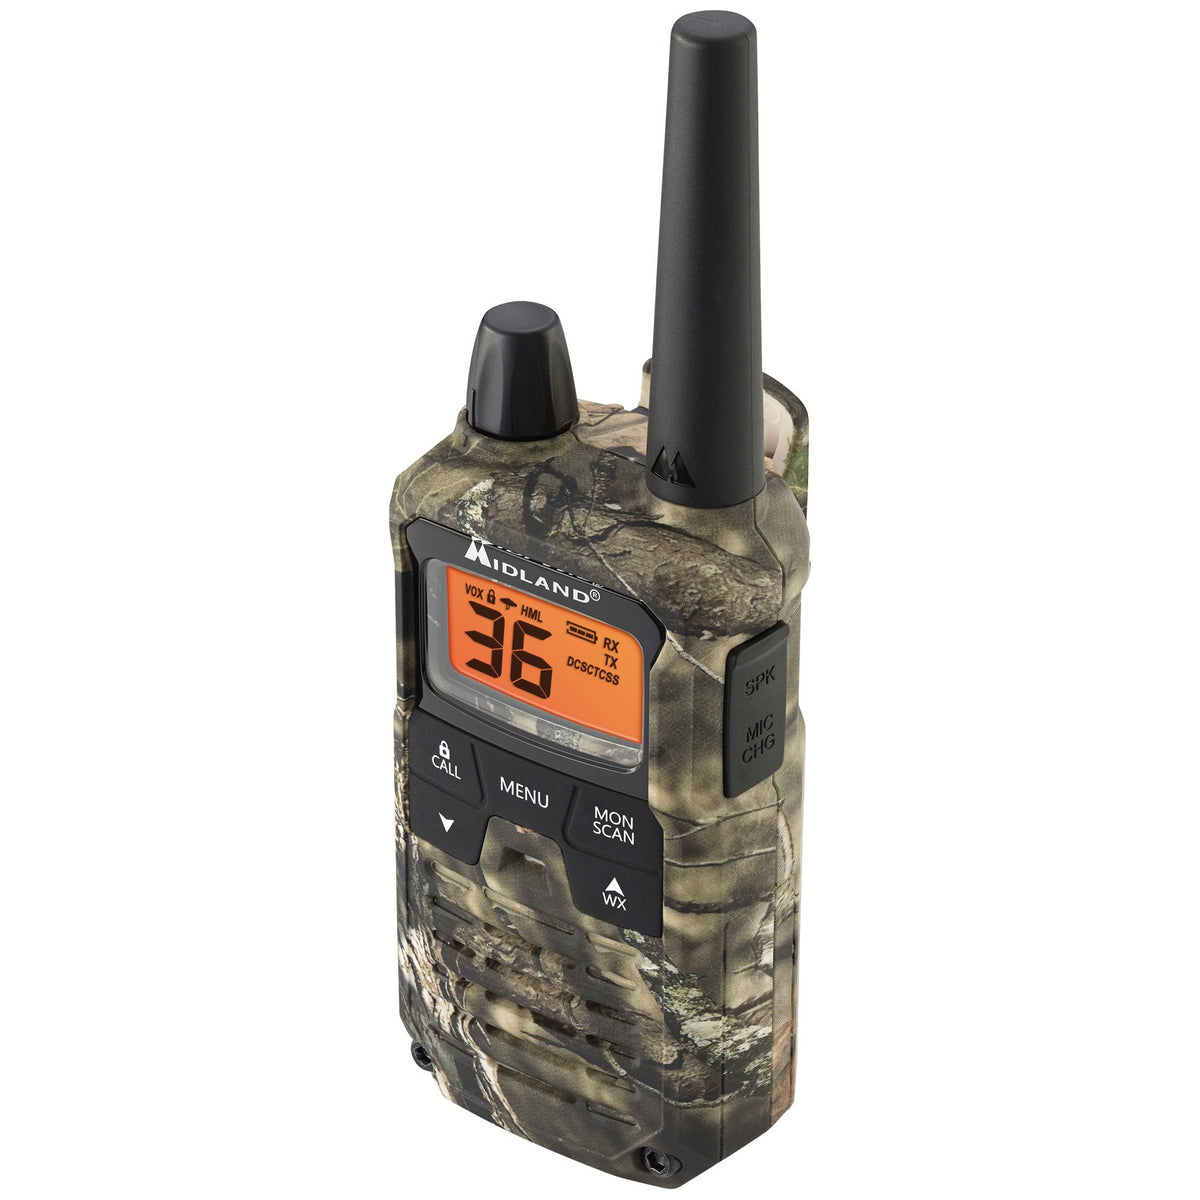 Midland X-TALKER T295VP4 GMRS Two-Way Hunting Radio